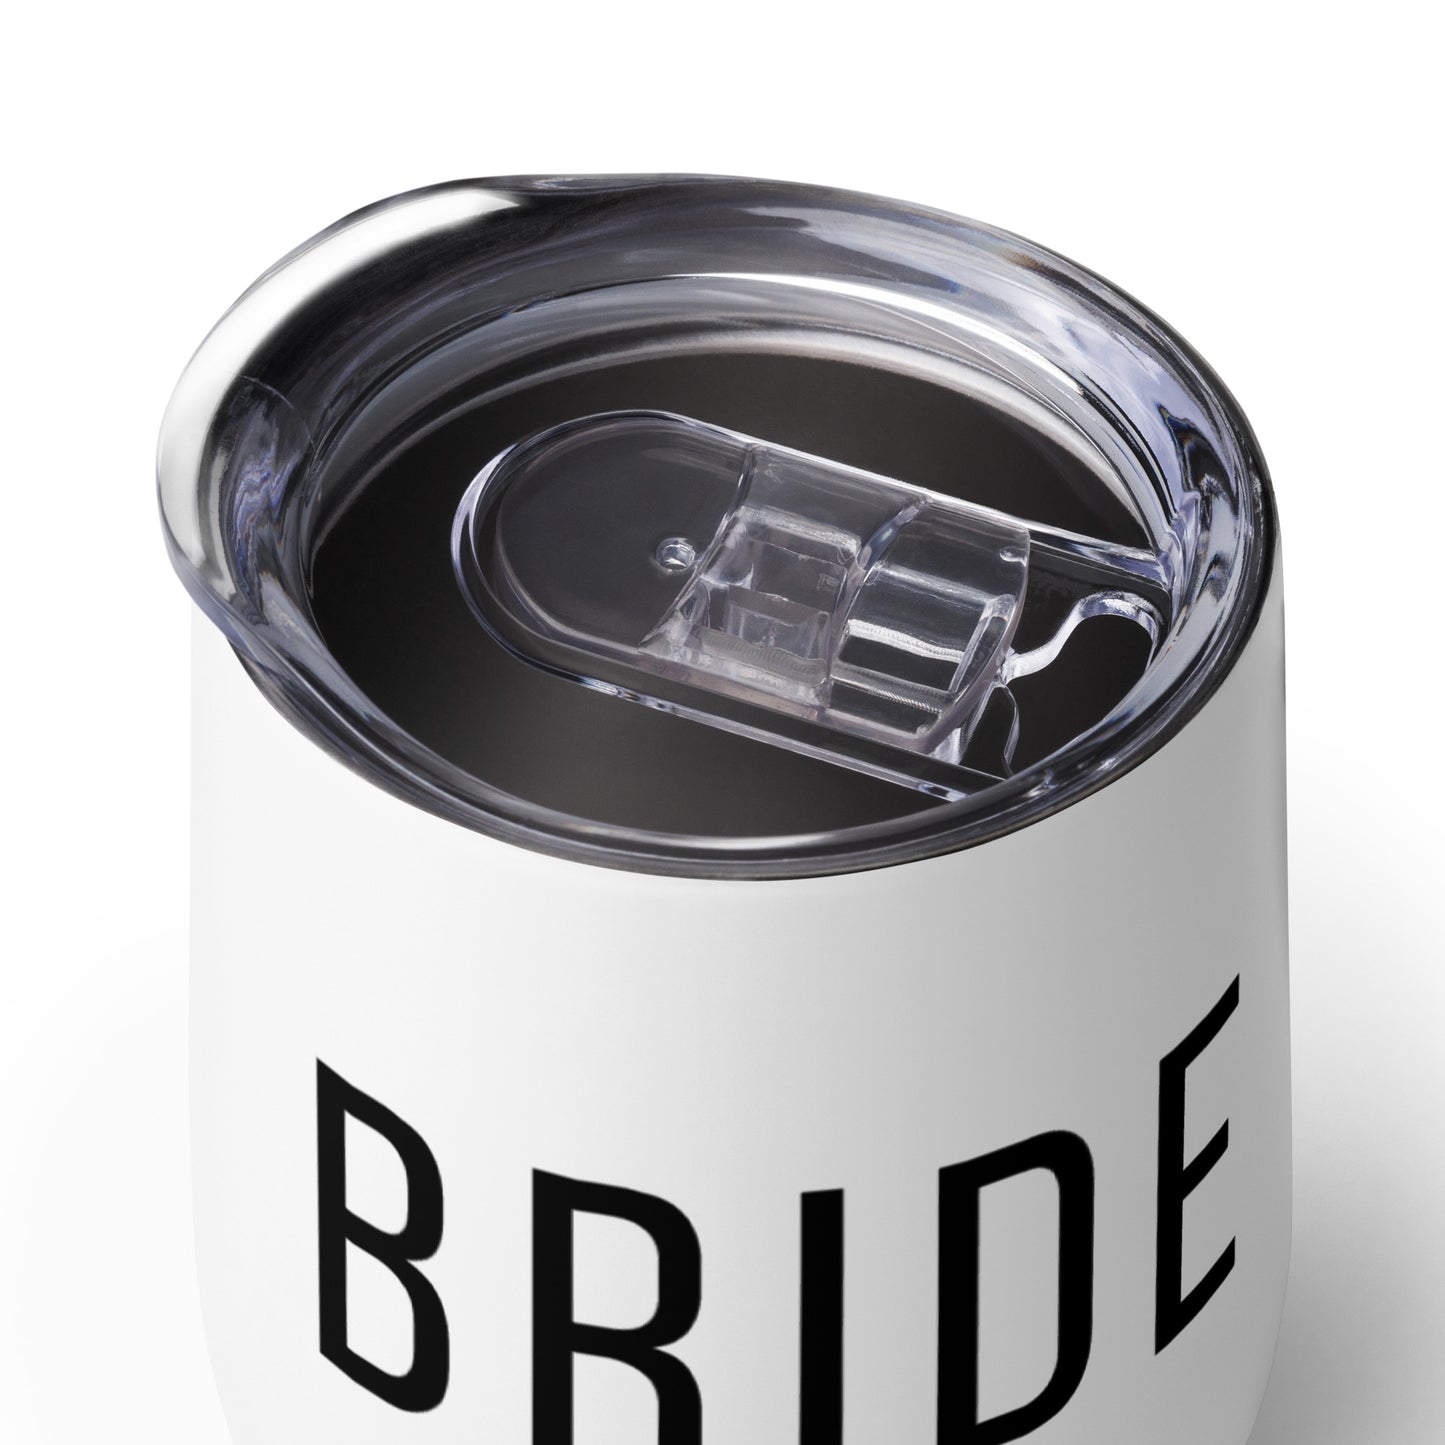 Engaged | Bride to Be | Gift for Bride  Wine tumbler